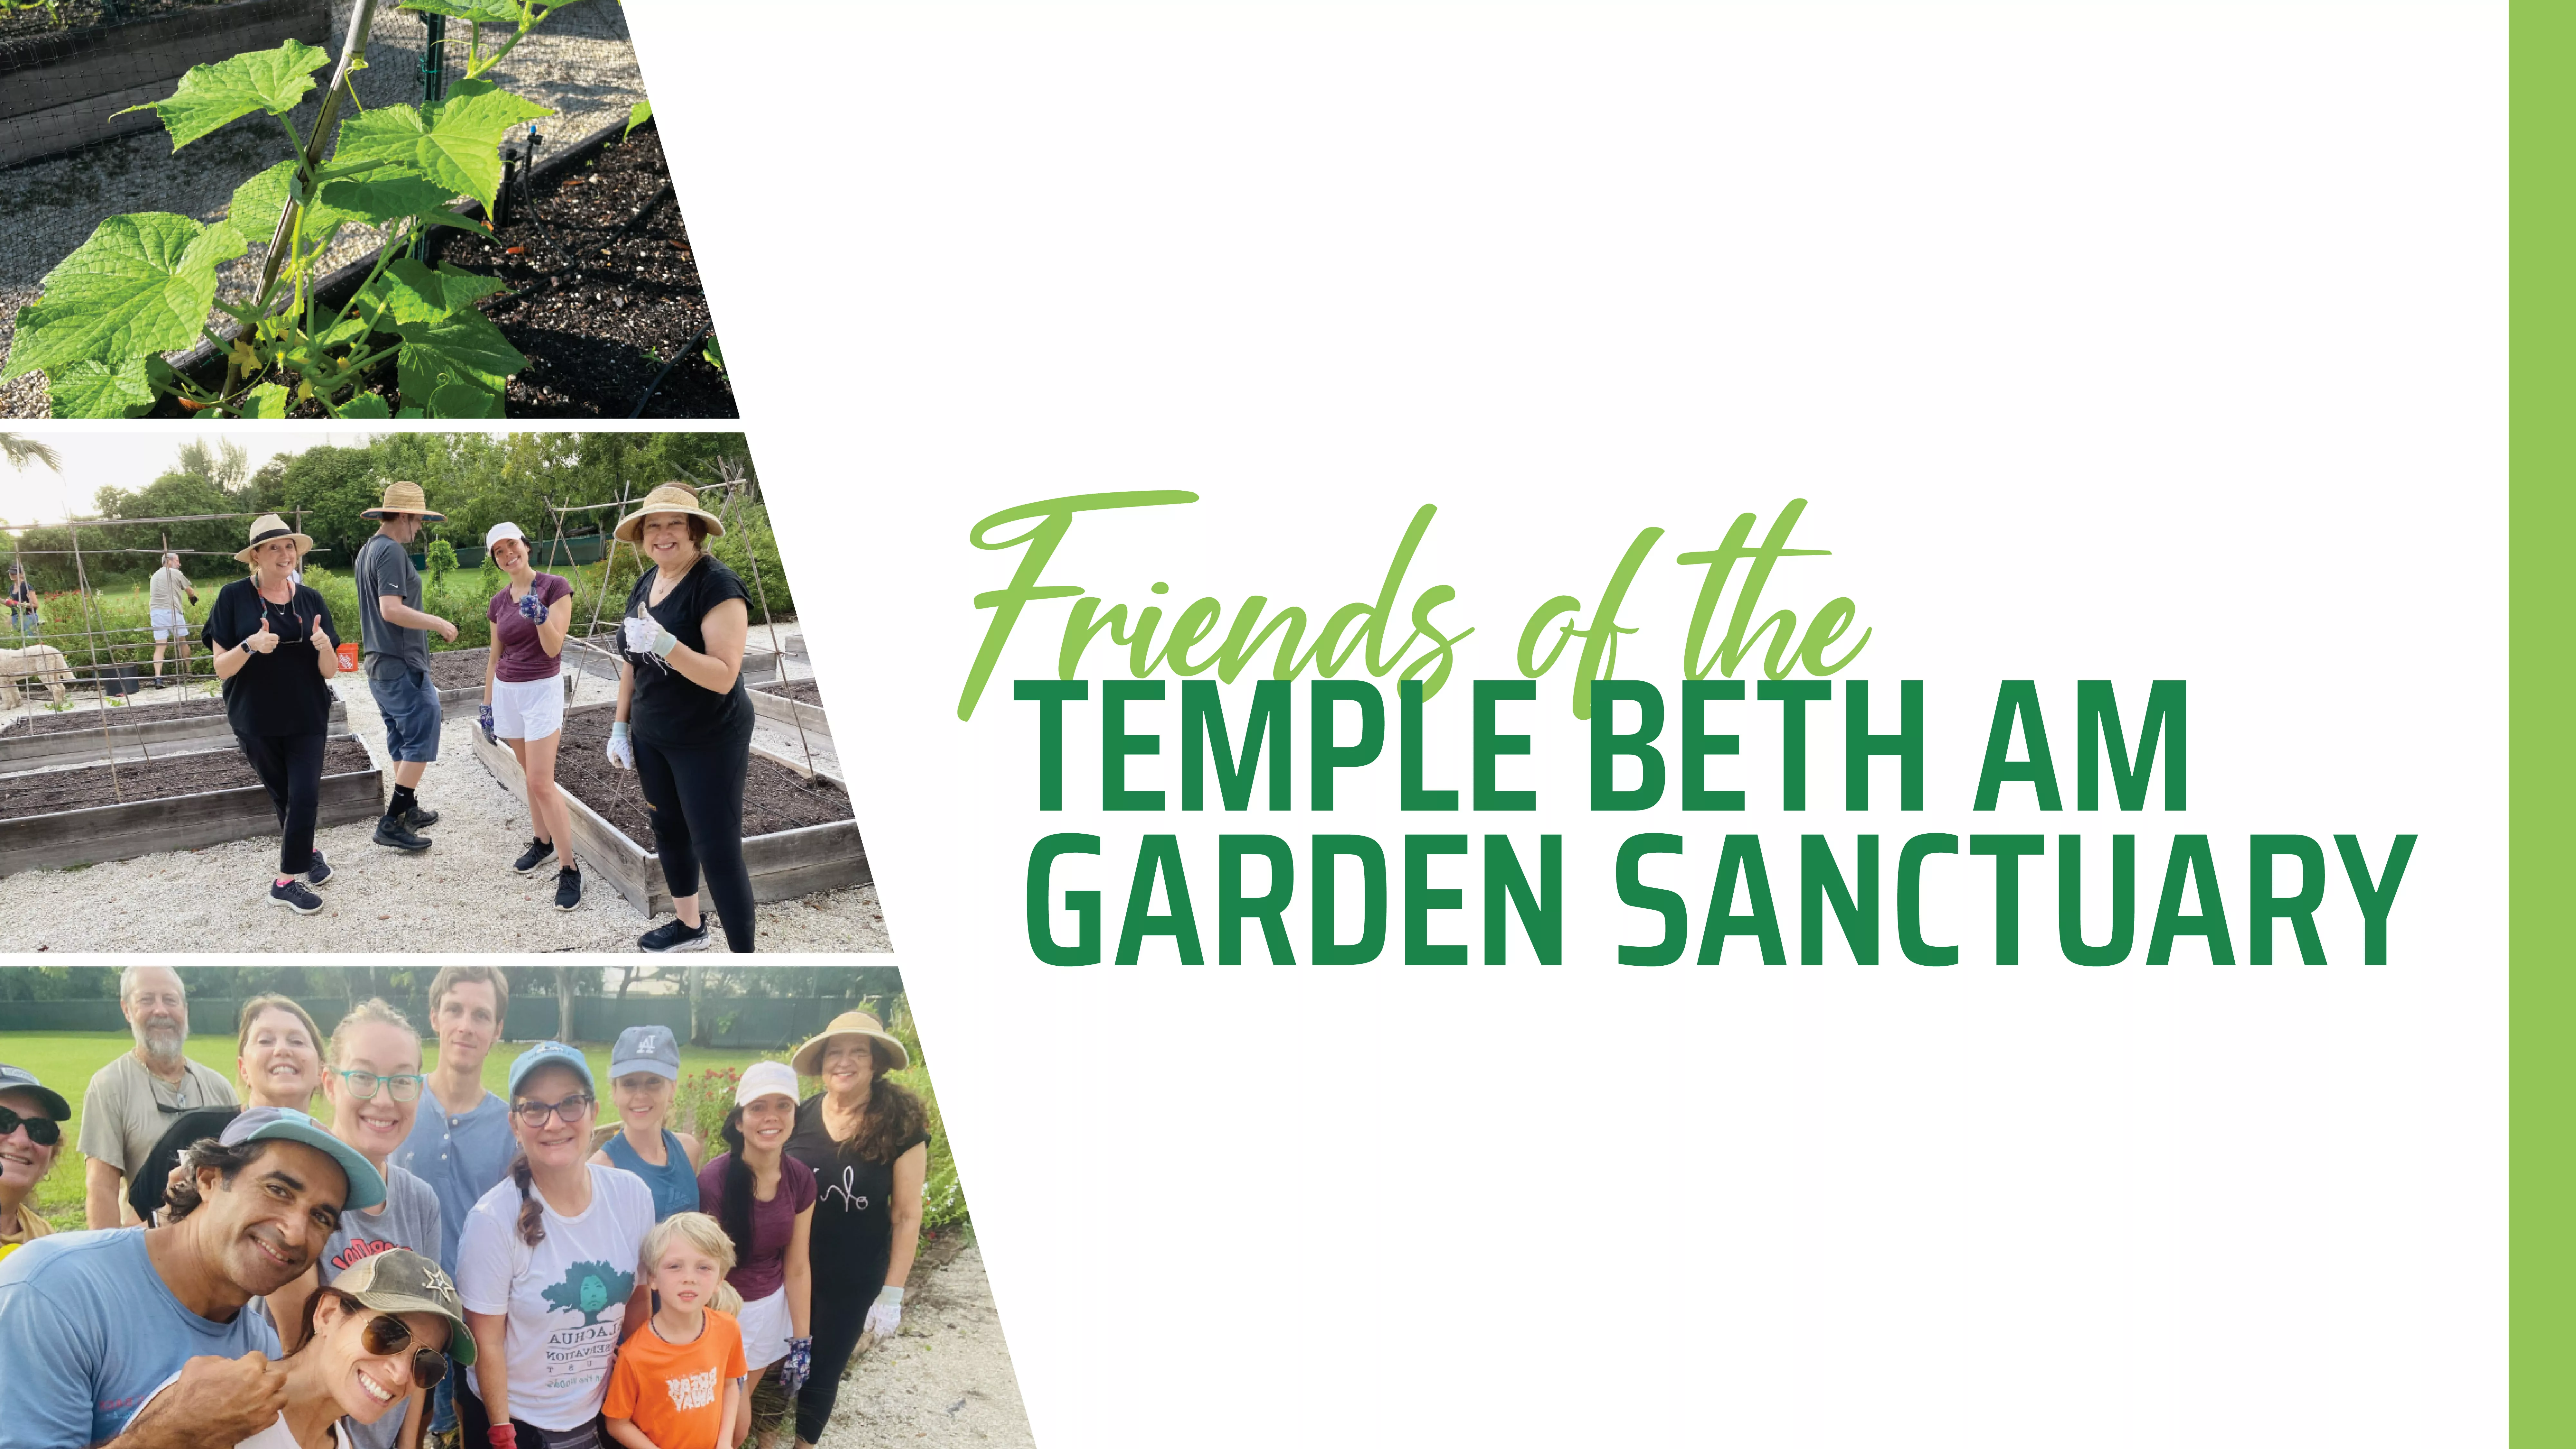 Friends of the temple beth am garden sanctuary plants people smiling next to garden banner